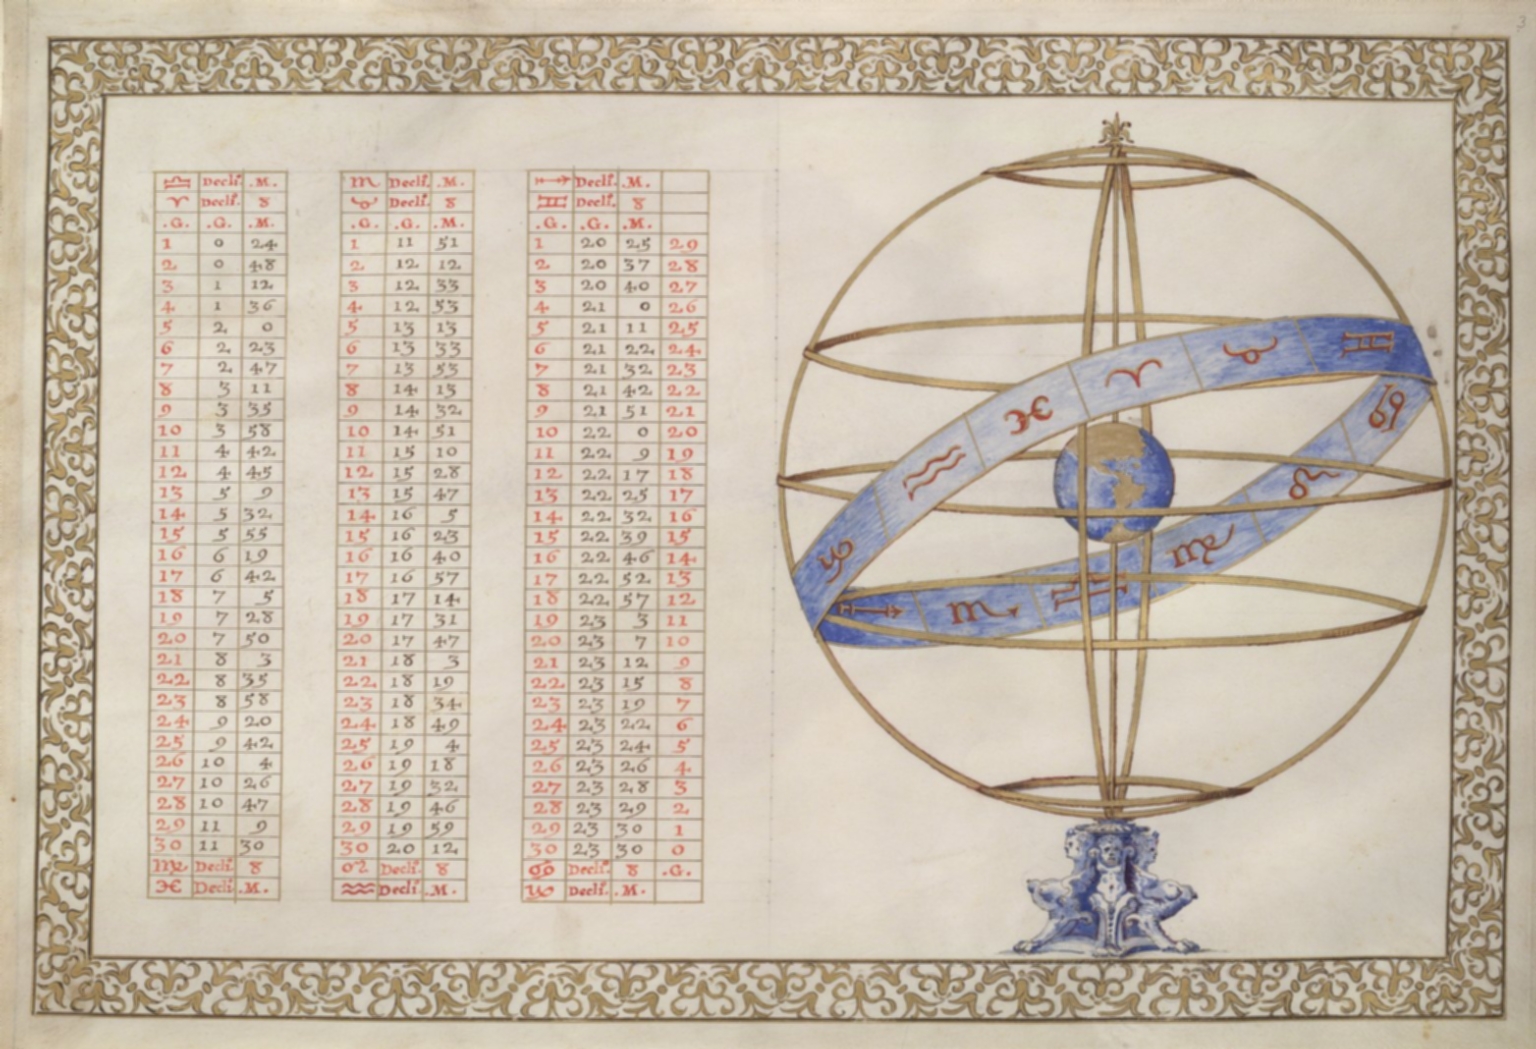 Table of declinations and armillary sphere